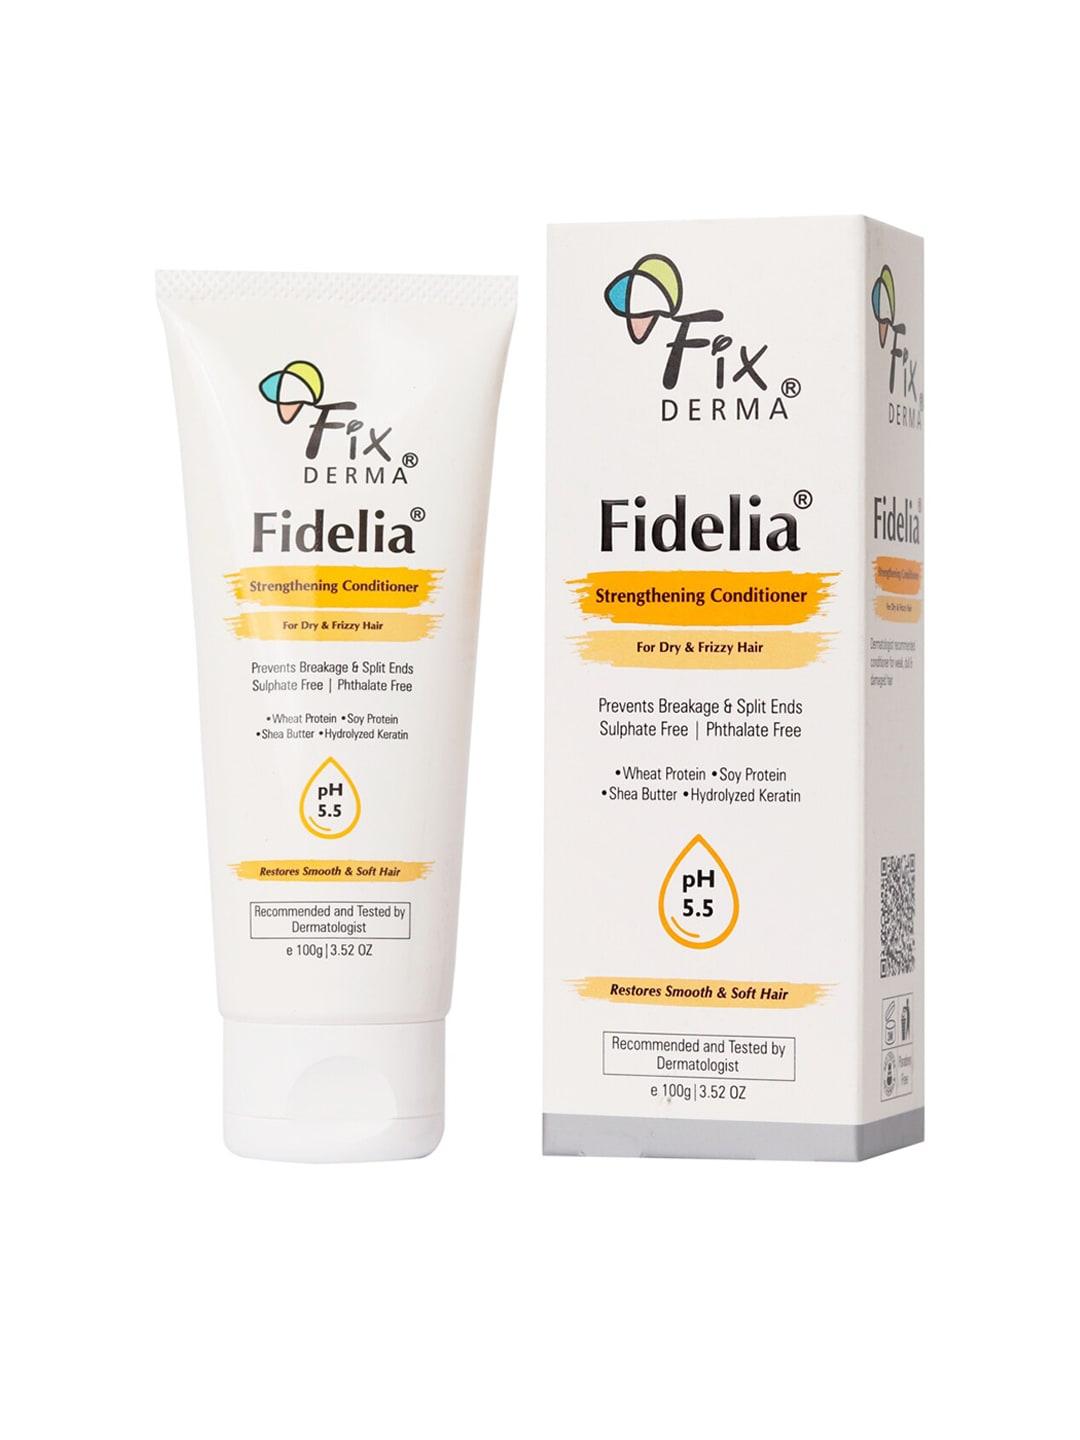 FIXDERMA Fidelia Strengthening Hair Conditioner with Shea Butter For Dry Frizzy Hair- 100g